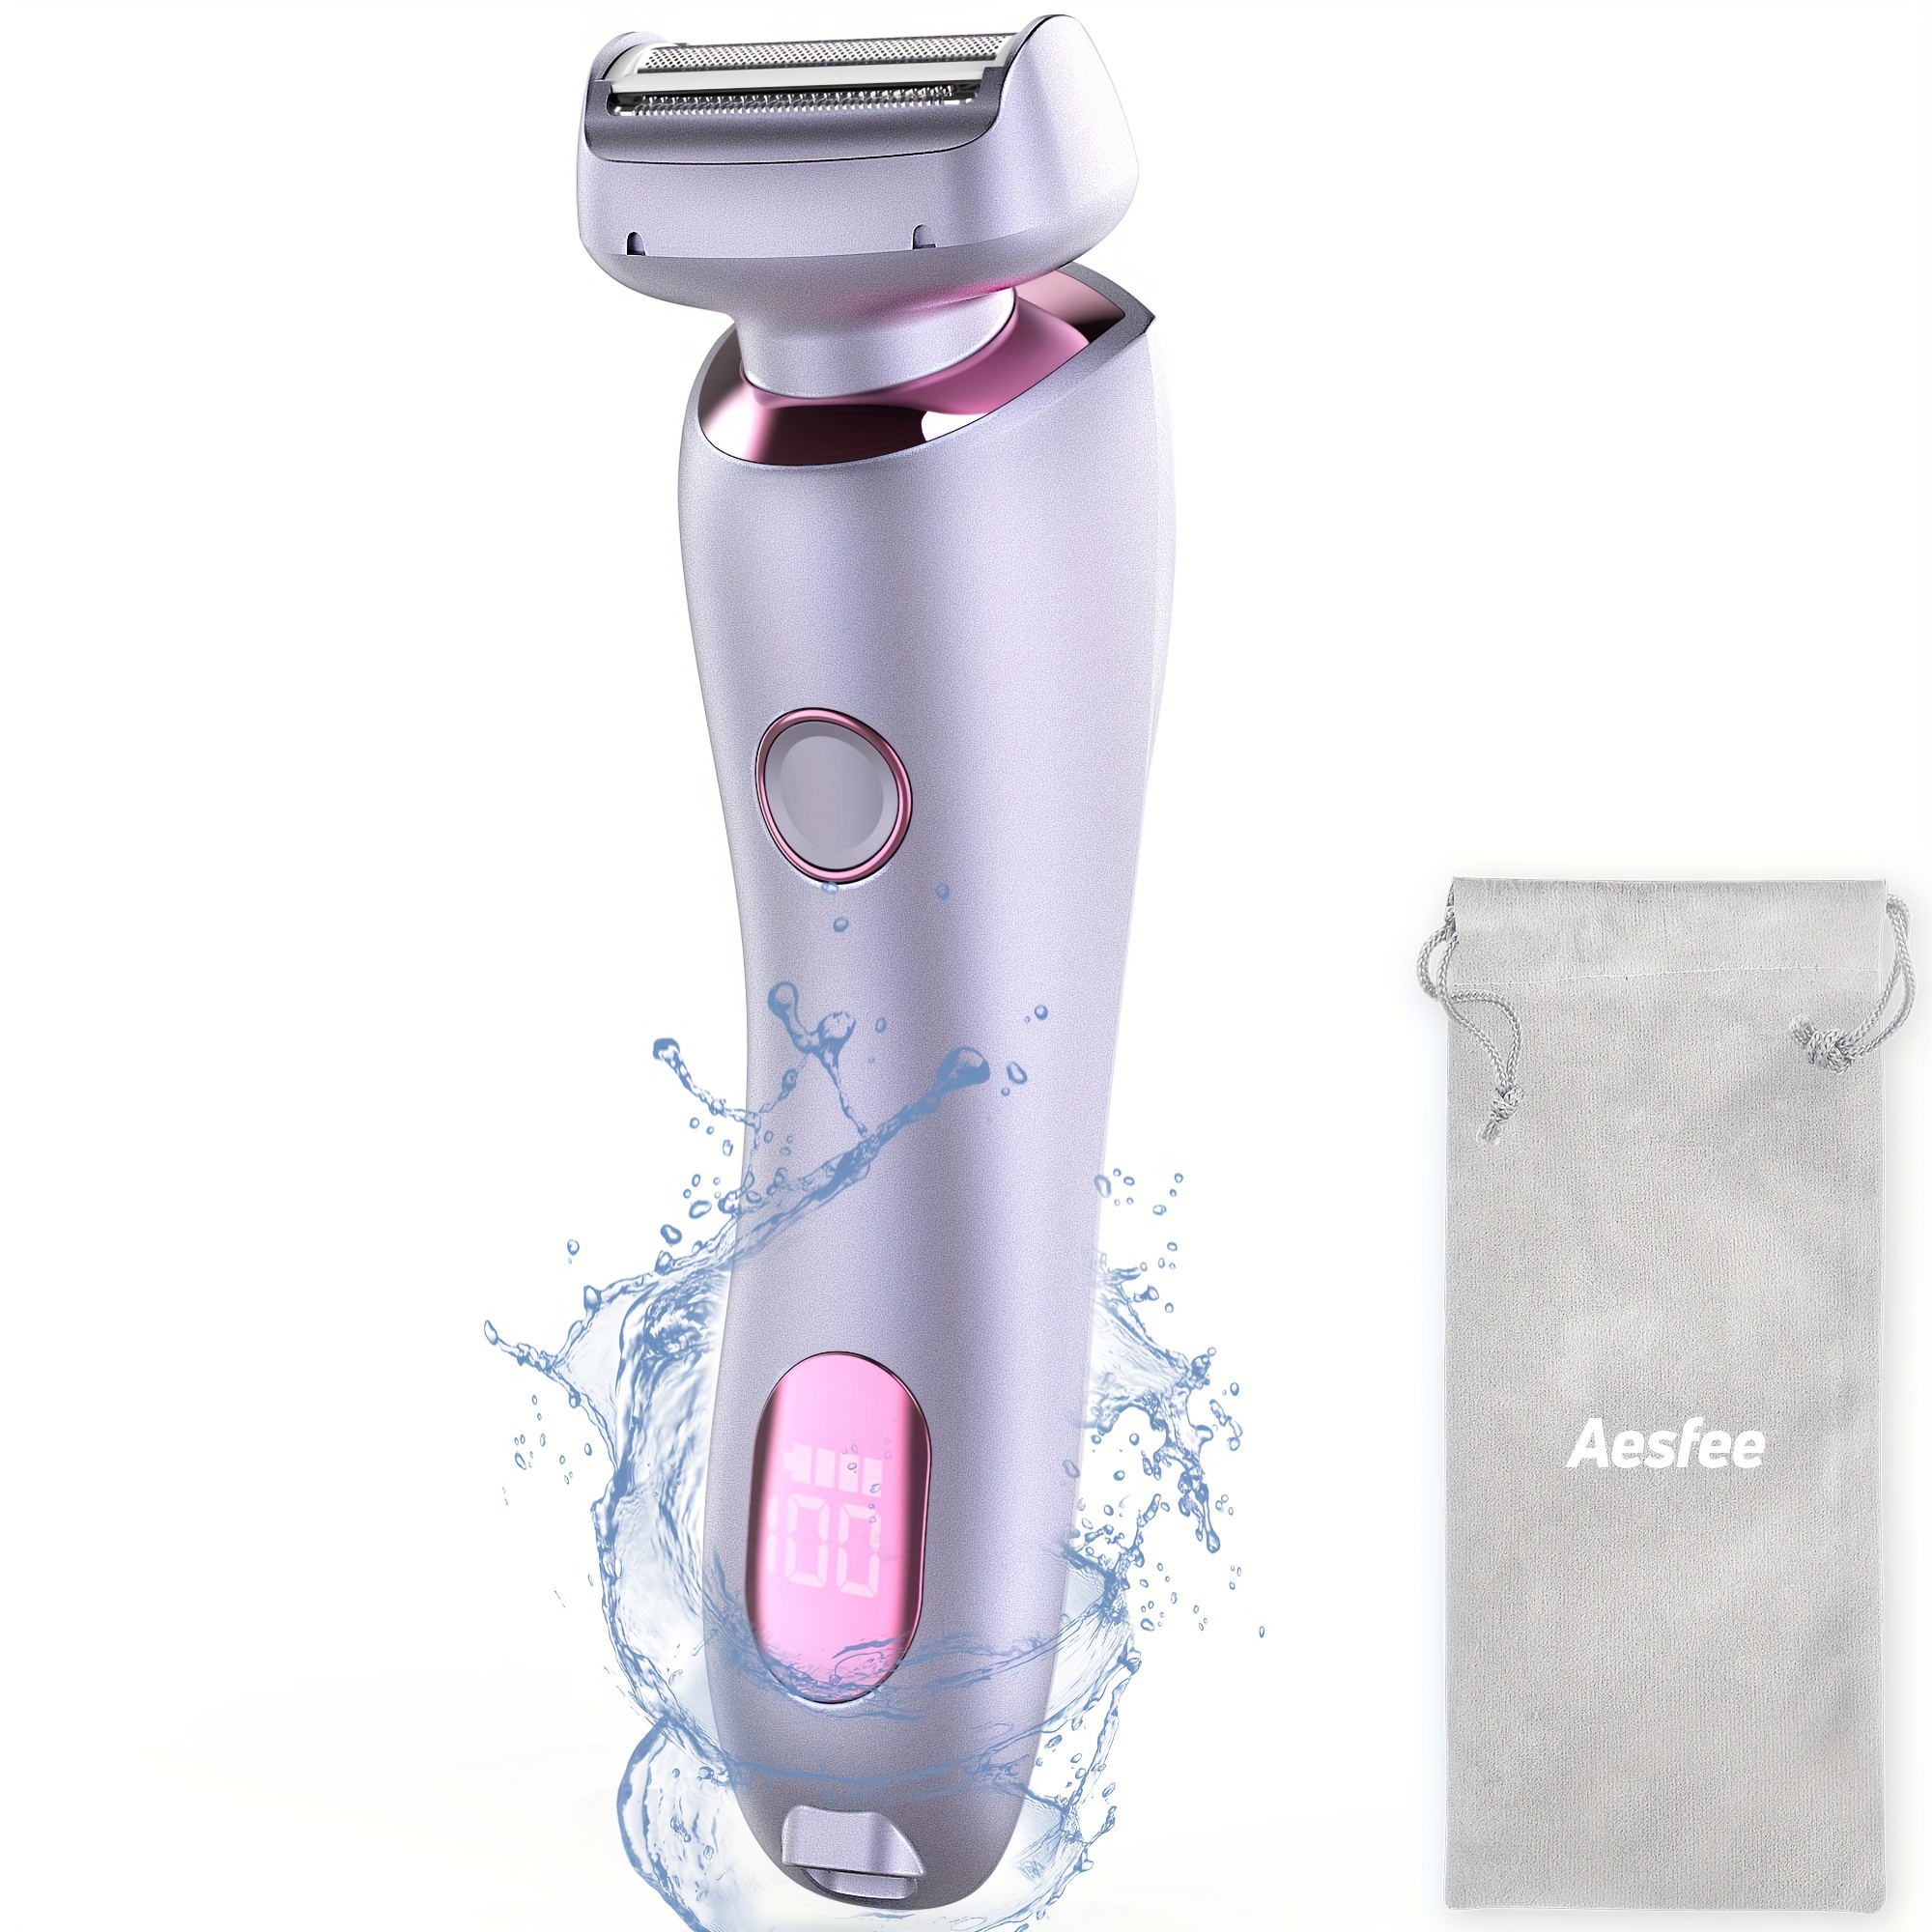 

Electric Shaver For Women Legs, Lady Razors Hair Removal Waterproof Wet Or Dry For Underarm Arm Bikini Private Area Pubic Hair, Portable Painless Ladies Body Hair Trimmer Remover